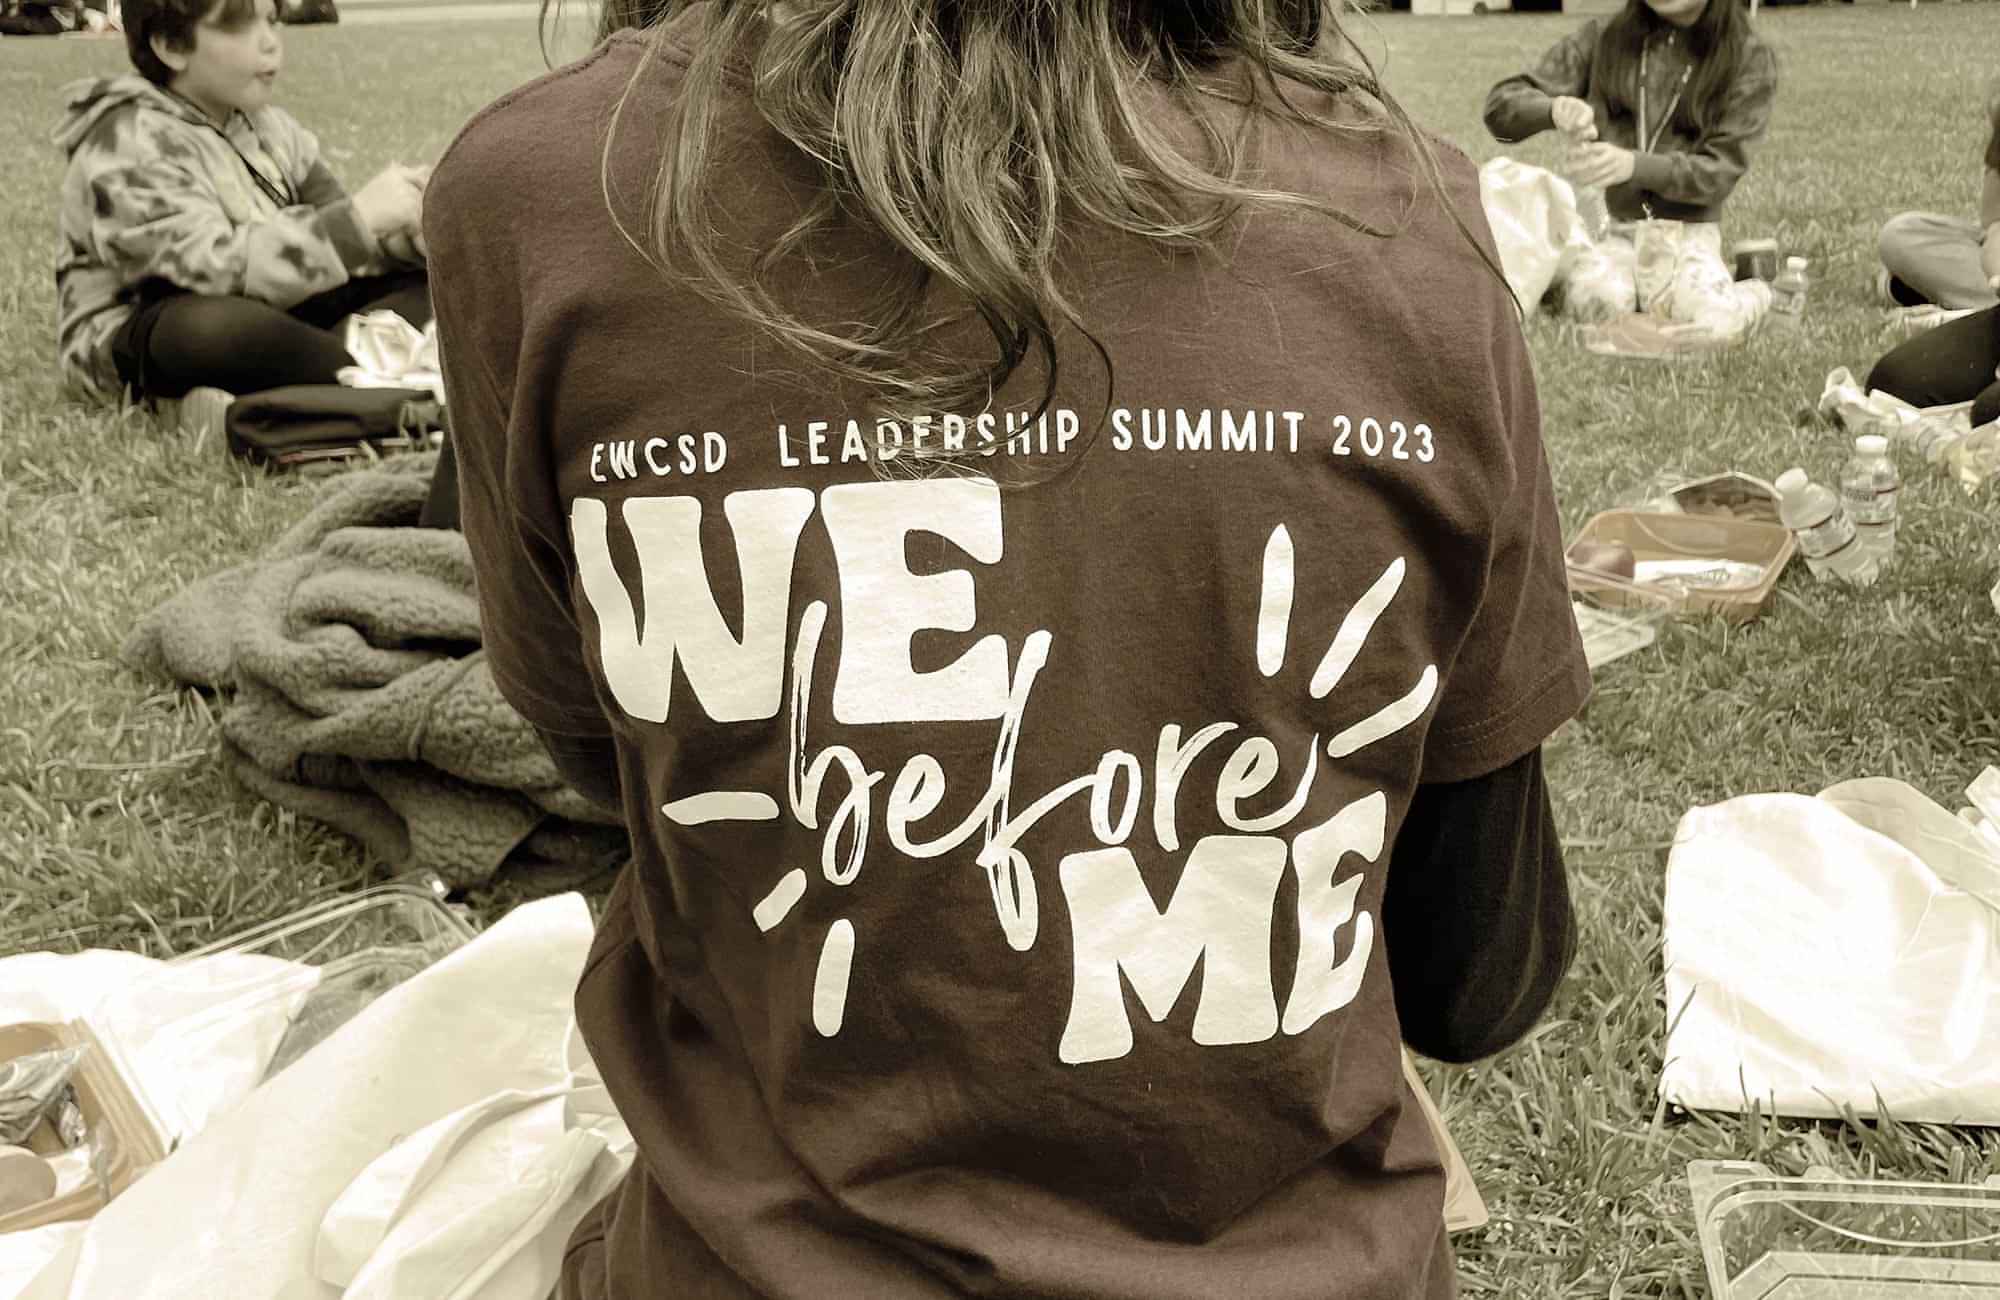 close back view of a person wearing a shirt that reads: EWCSD Leadership Summit 2023 - We before Me